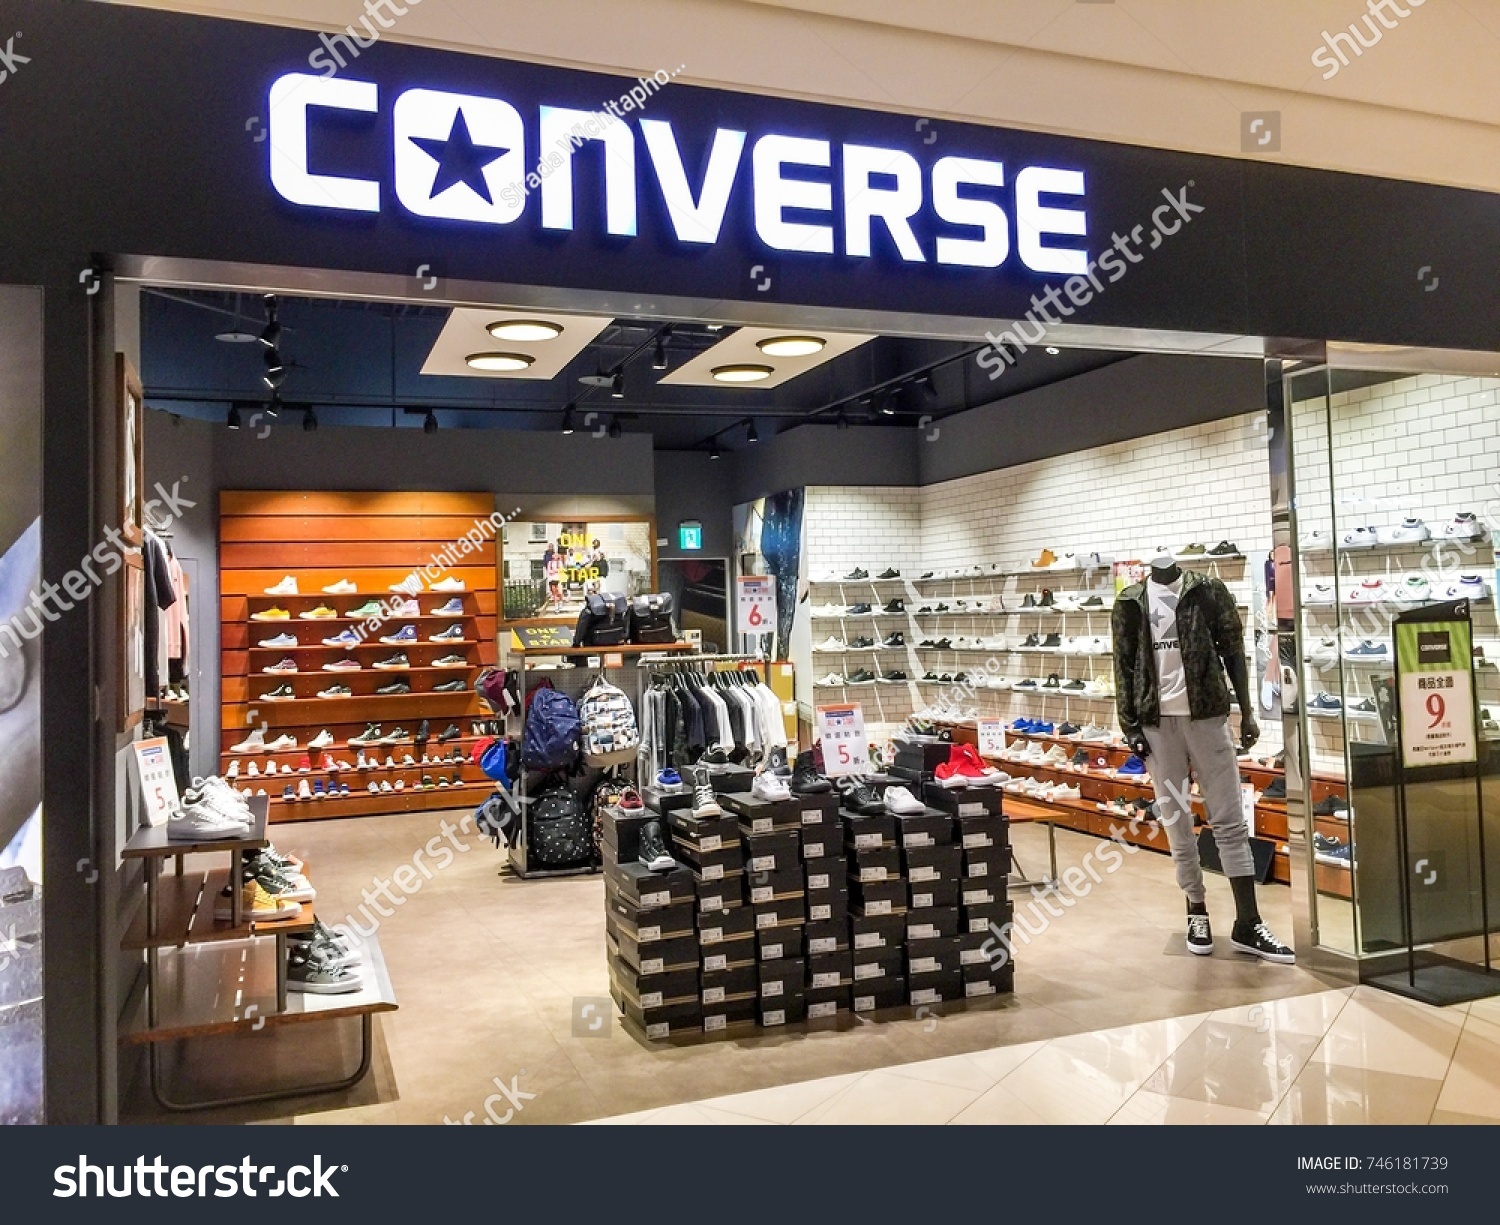 converse outlet mall, OFF 79%,Buy!